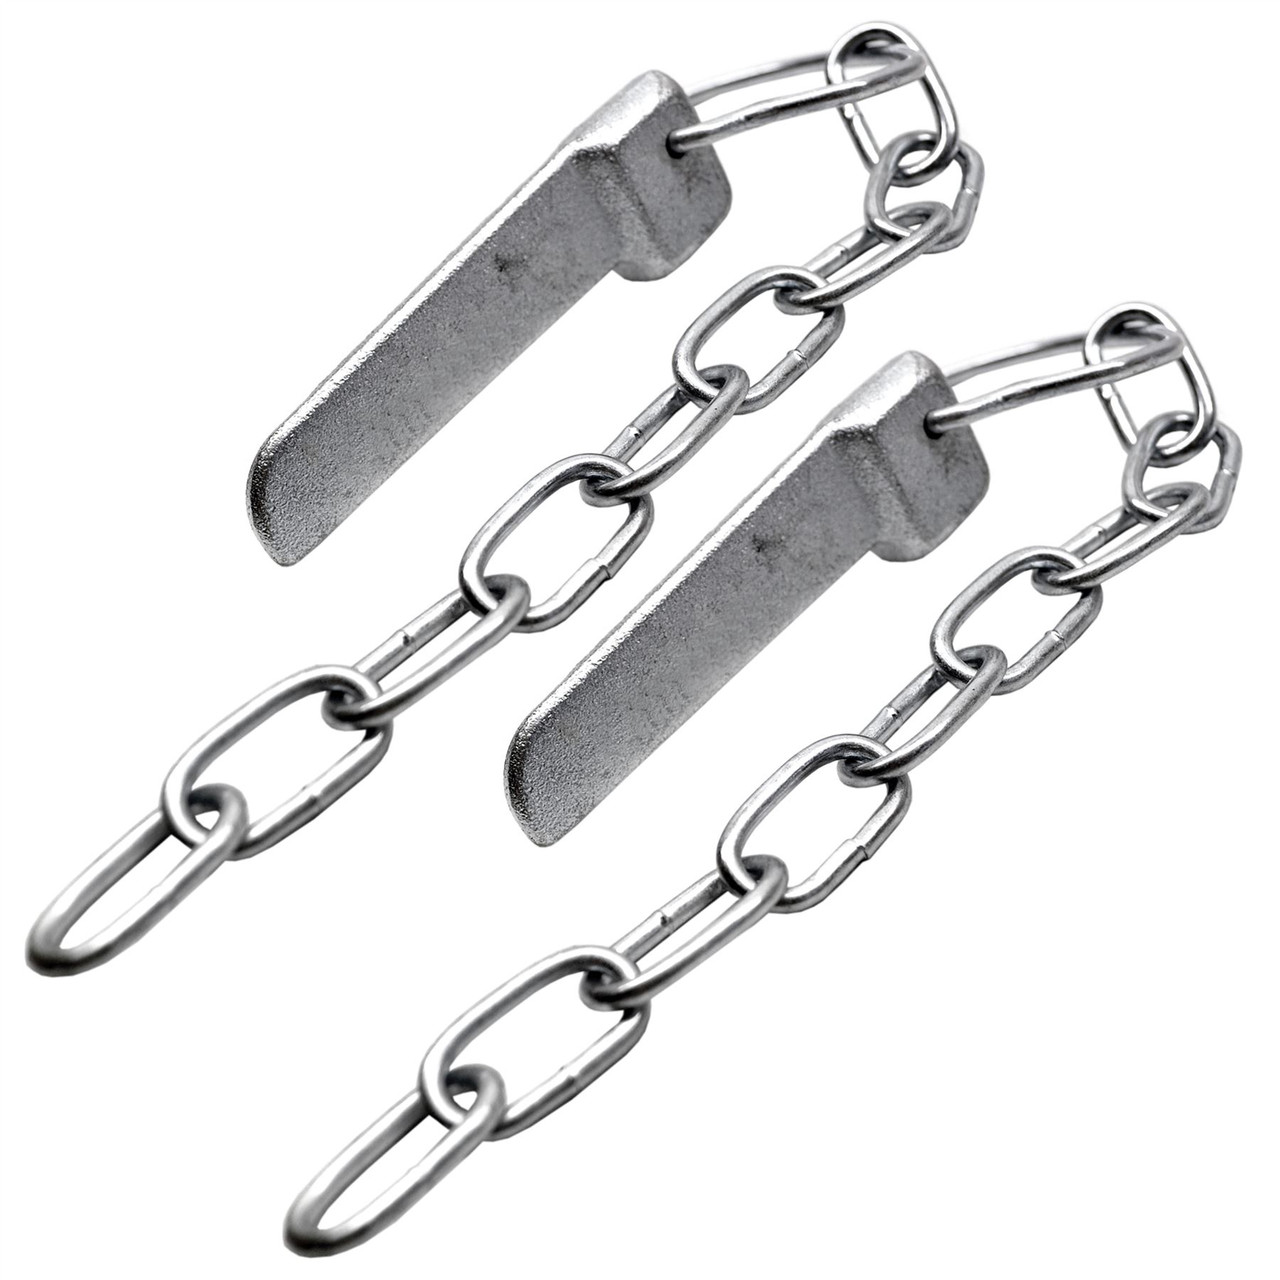 Flat Cotter Spring Ring / Linch Pin and Chain PAIR Zinc Plated DK12_Pair